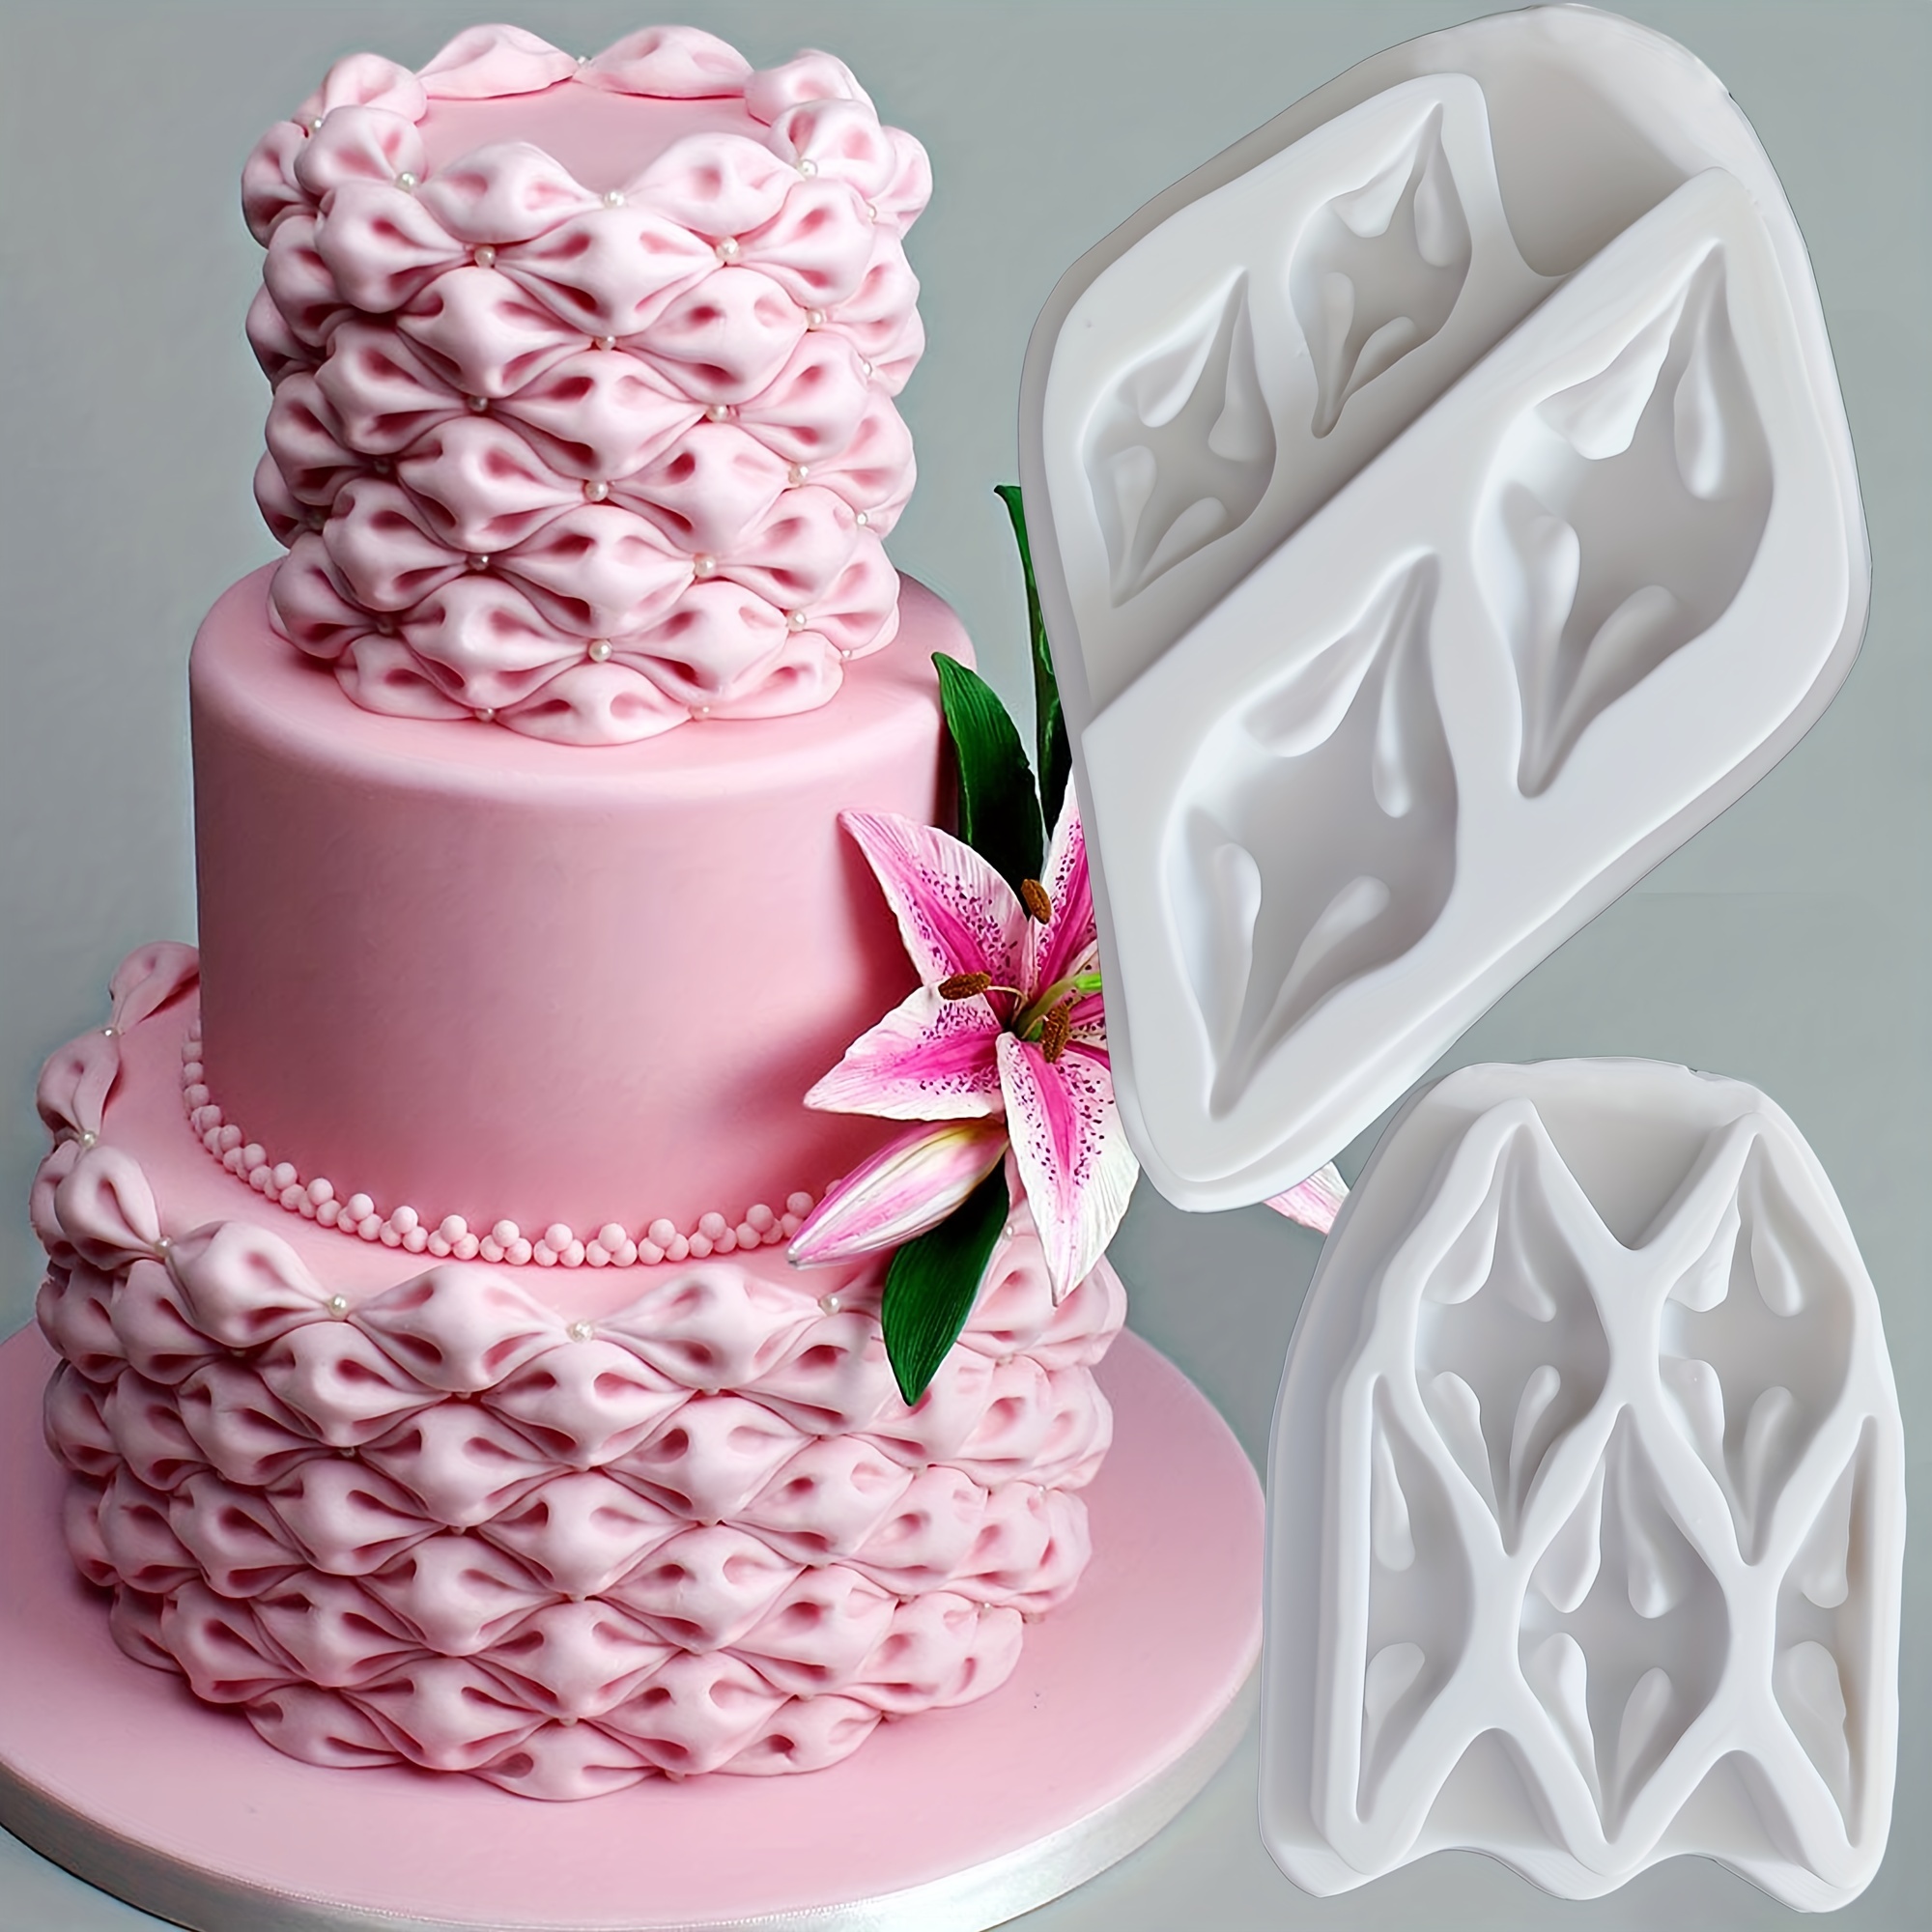 Silicone Fondant Mold Mushroom Snail Shape Fondant Cake Decoration Gum  Paste Chocolate Mould Home Pink Kitchen Appliances Factory Price Expert  Design Quality Latest From Sukatiger, $2.73